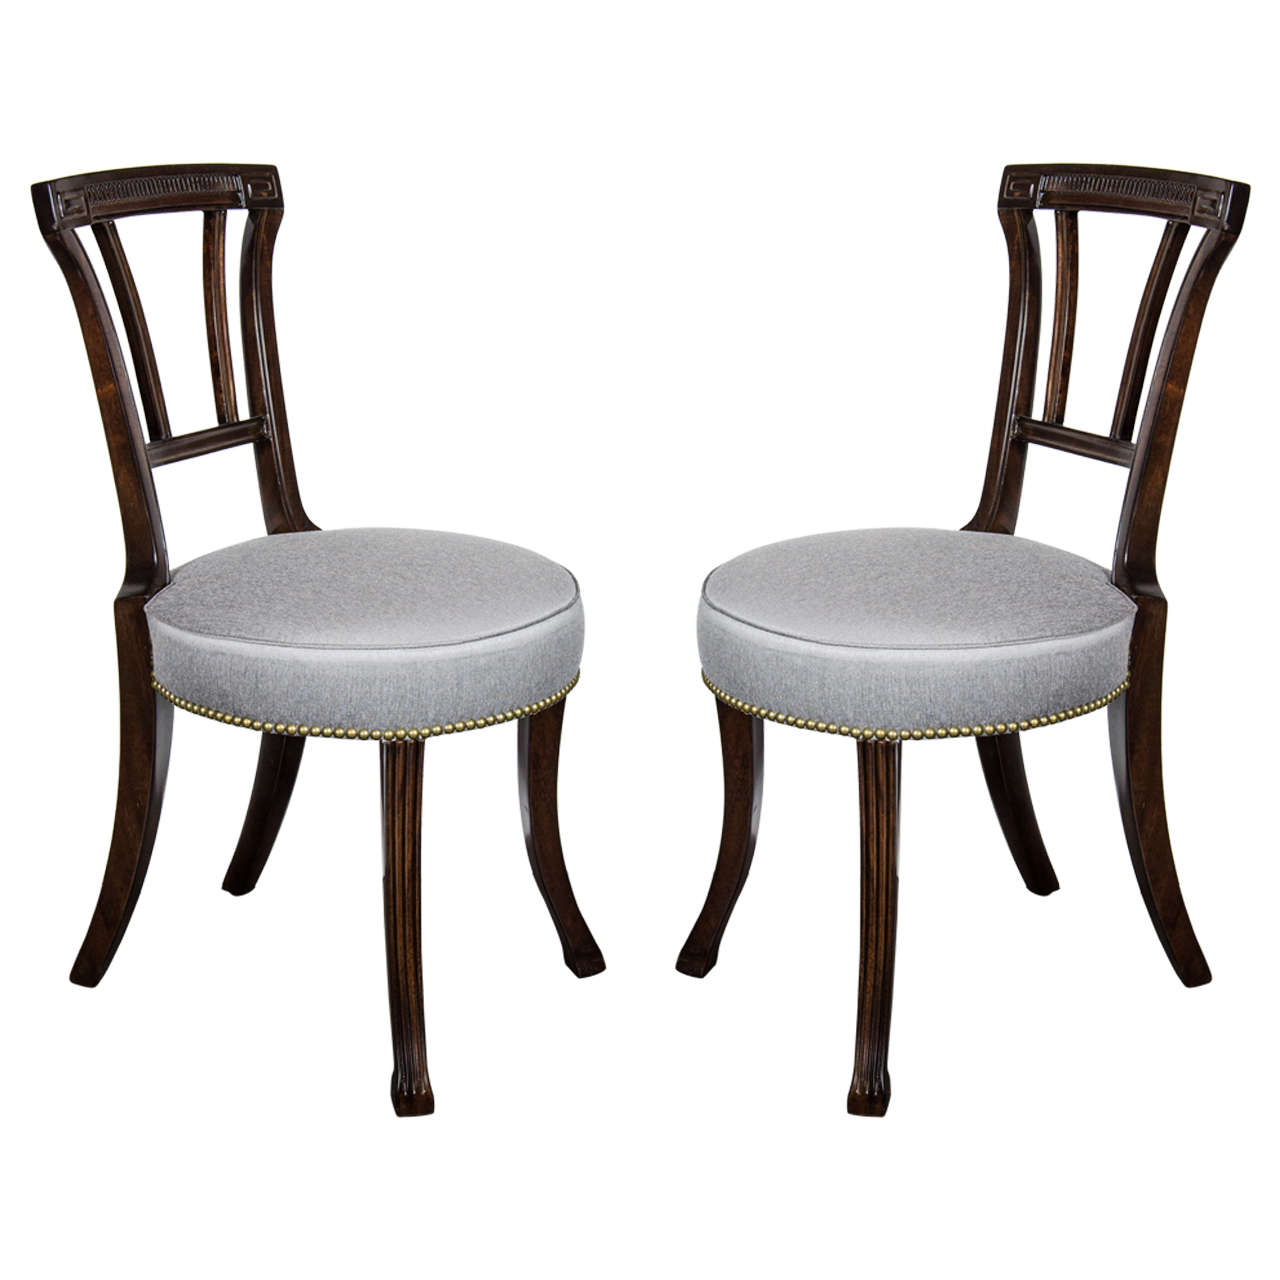 Pair of 1940s Hollywood Greek Key Occasional Chairs by Grosfeld House